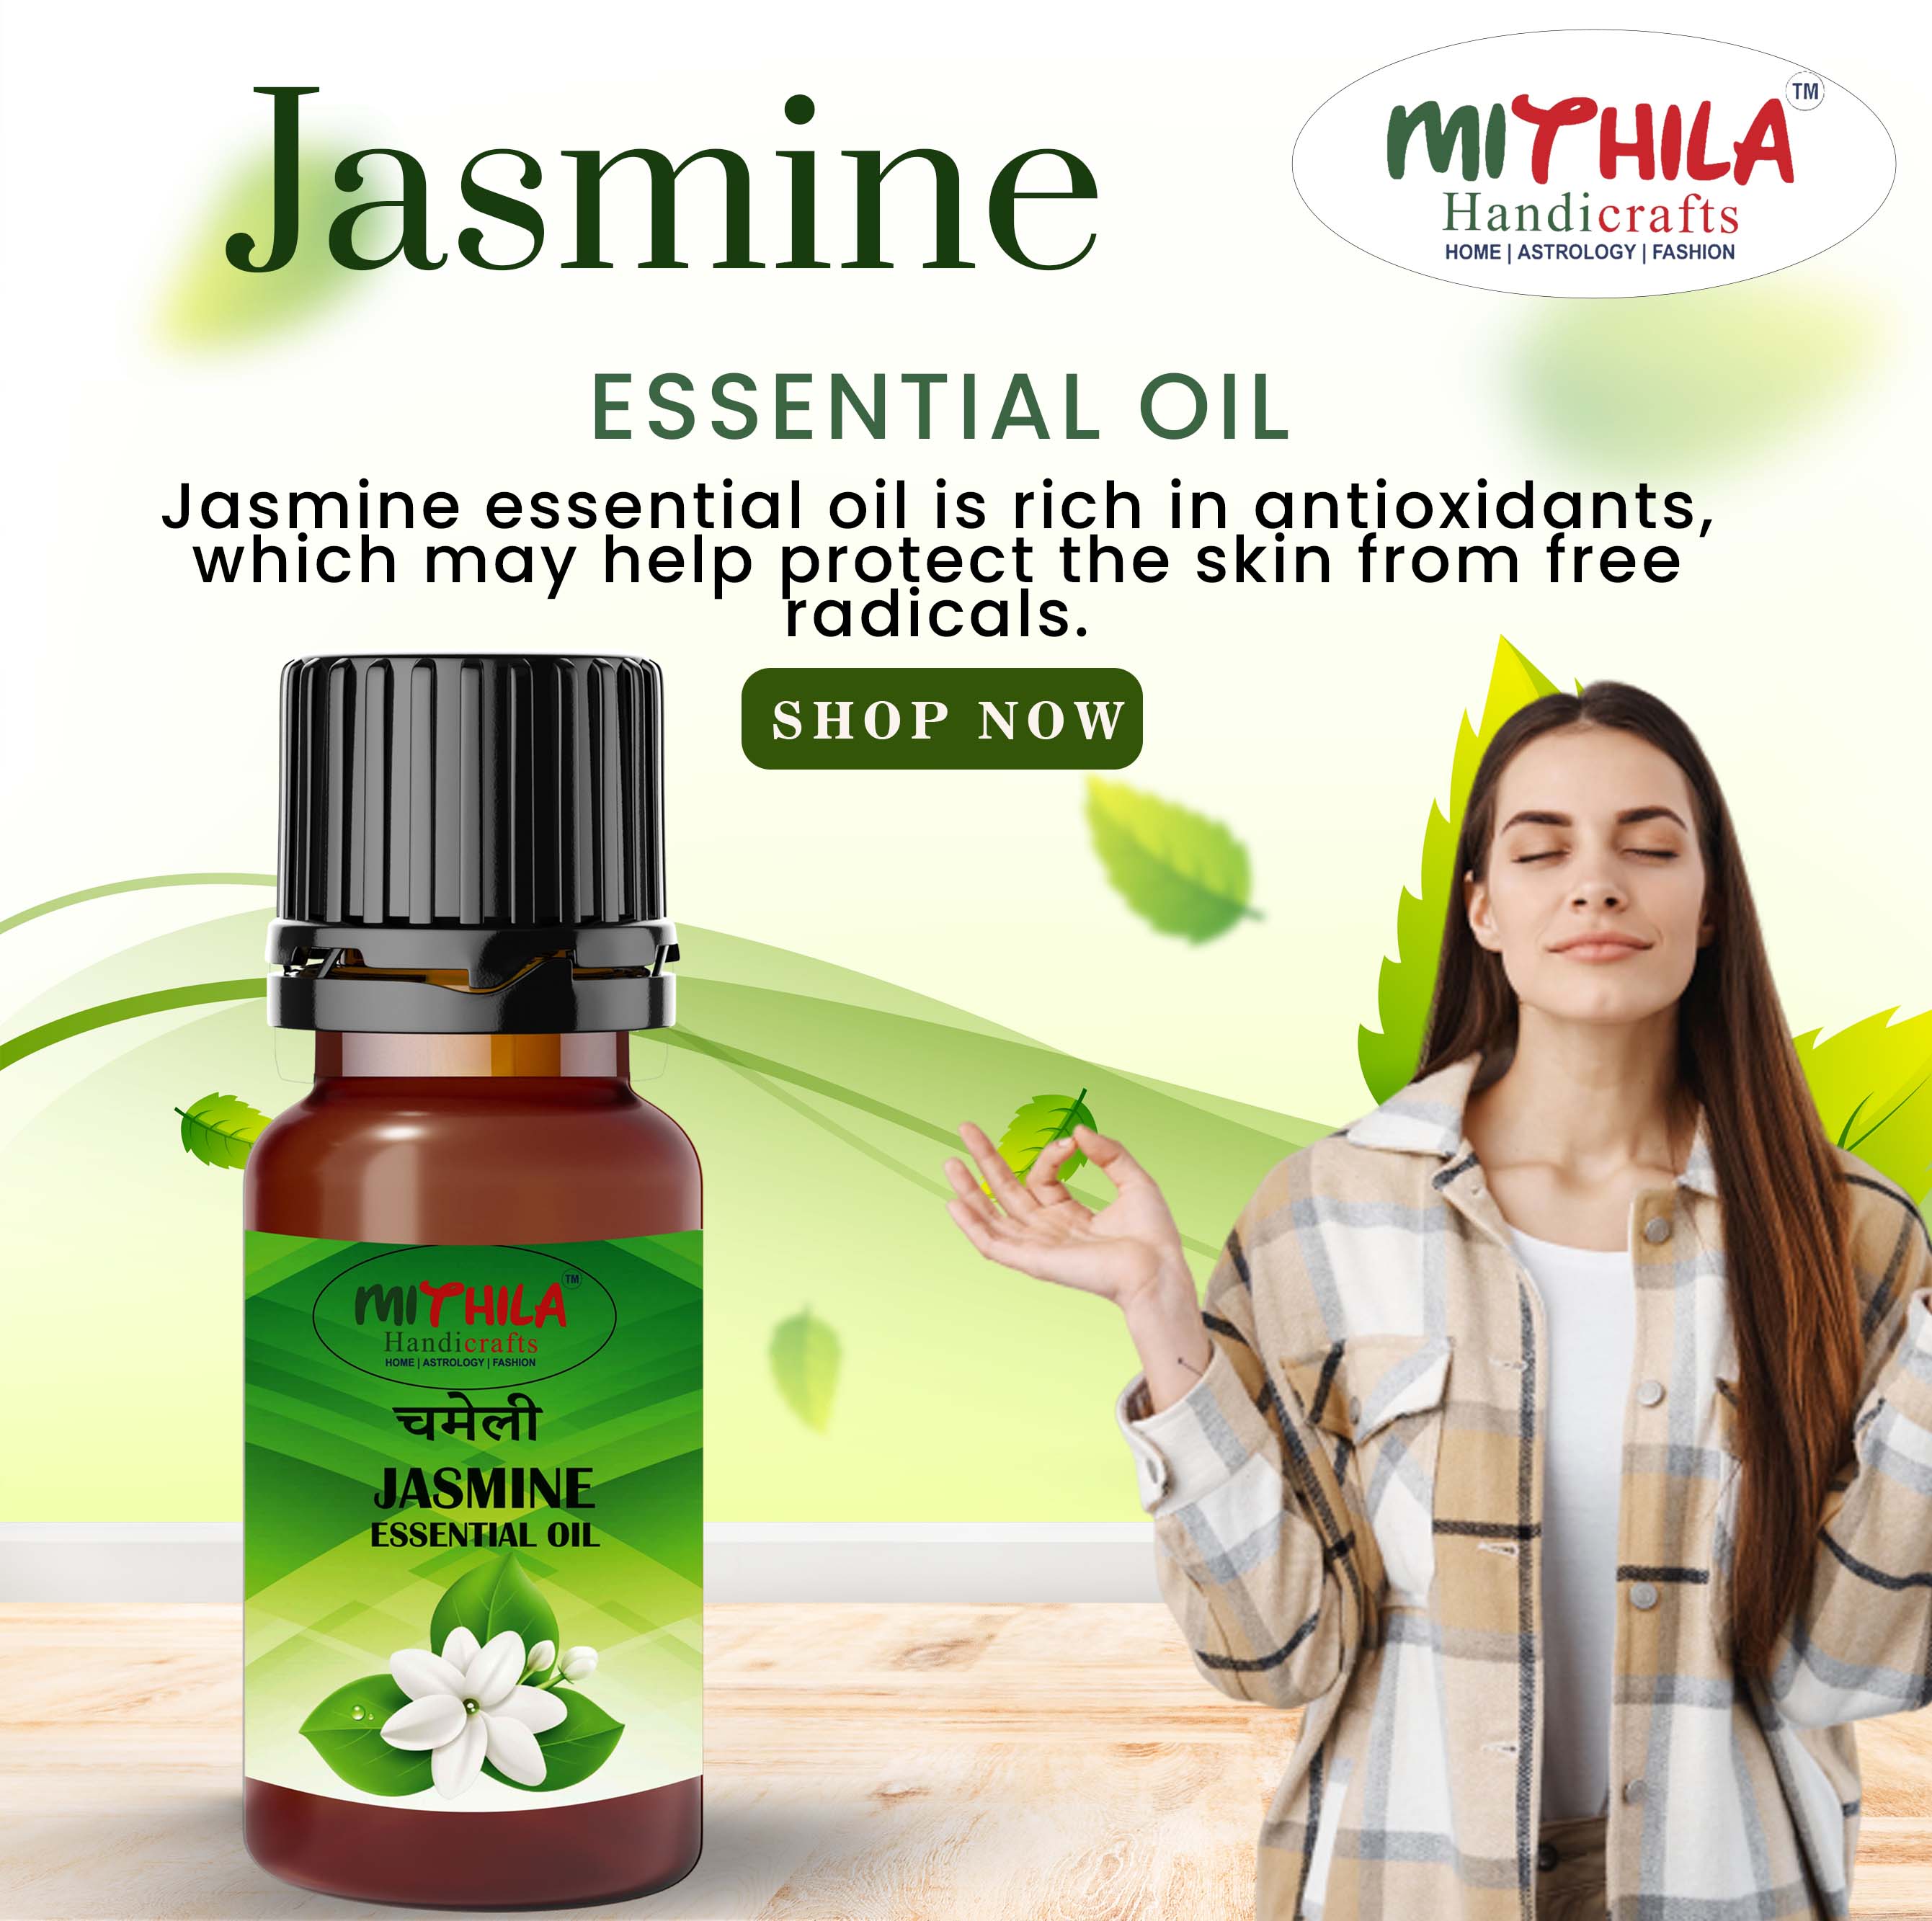 Jasmine Essential Oil For Skin, Hair Care, Home Fragrance, Aroma Therapy 40ml